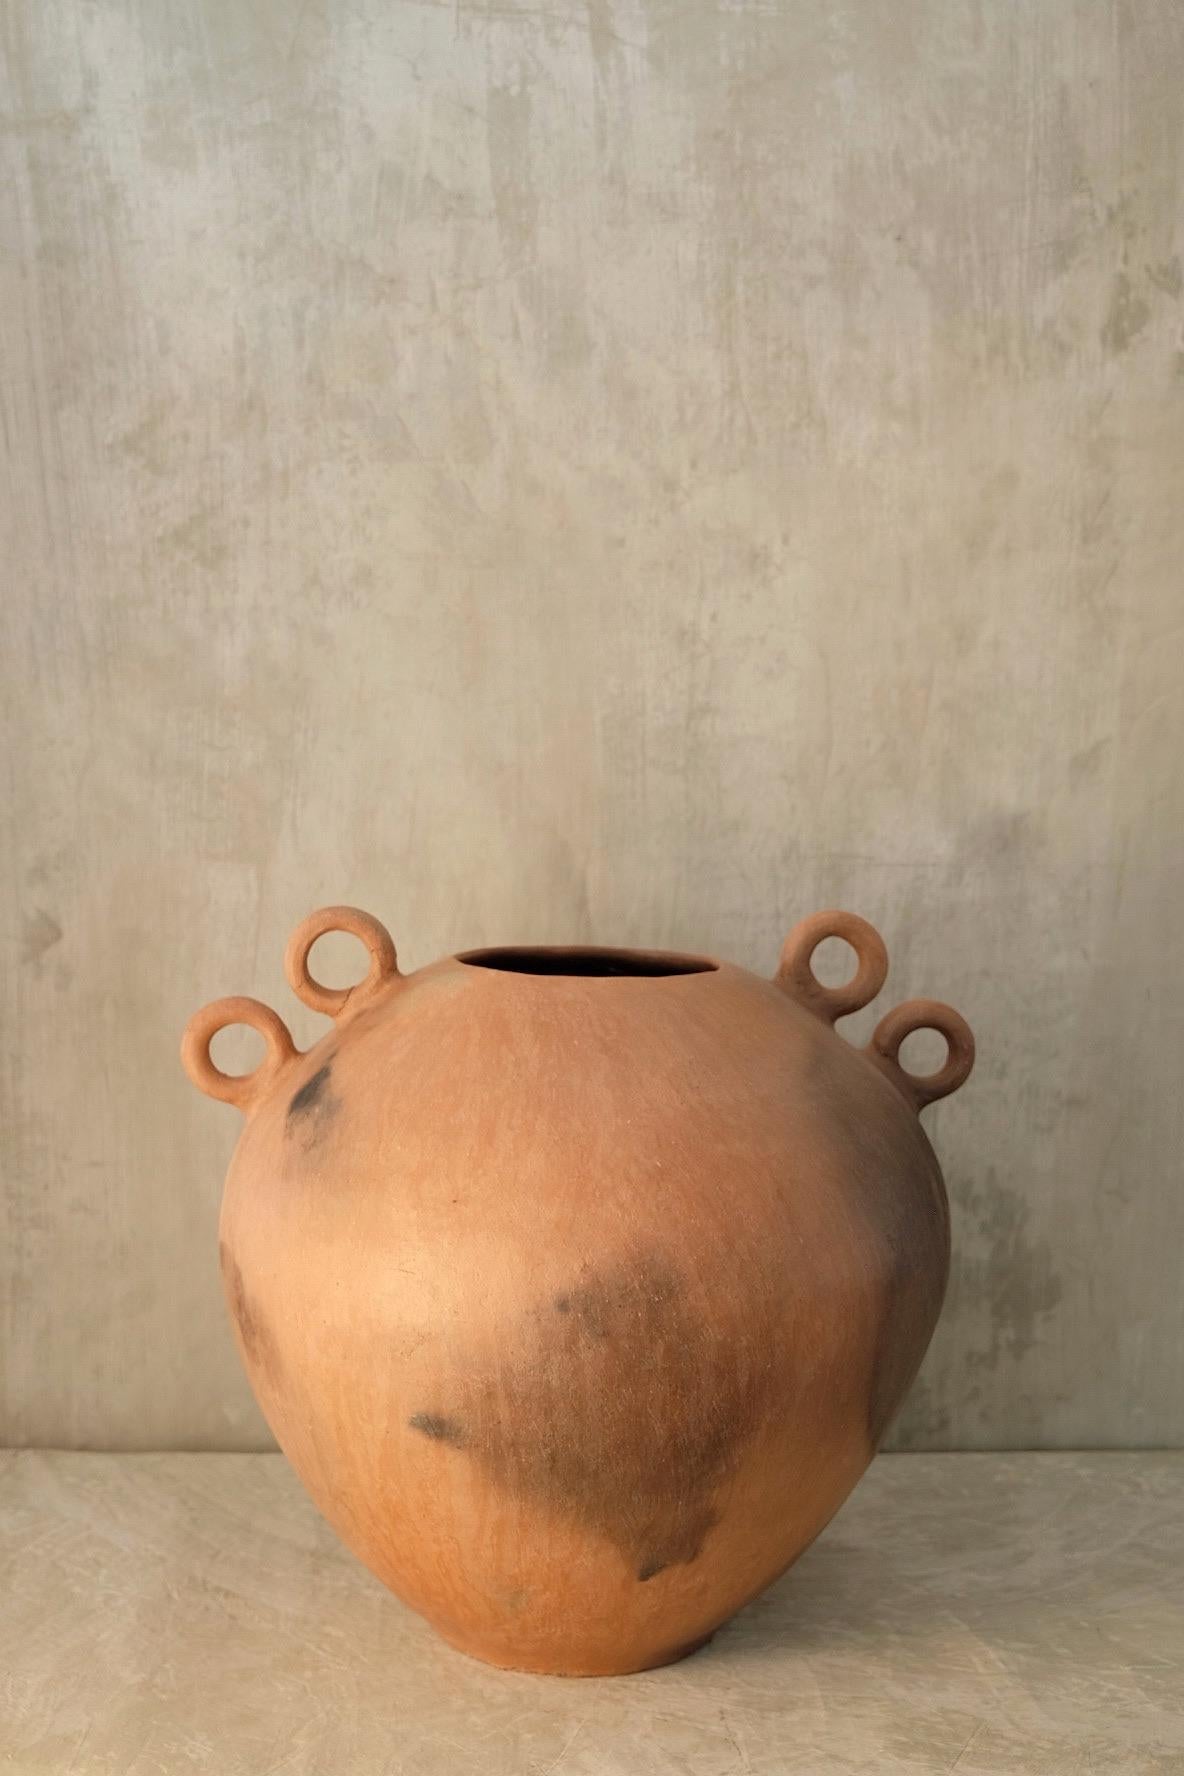 Tierra Caliente vase by Onora
Dimensions: D 20 x H 30 cm
Materials: Clay

Hand sculpted clay, covered with a mineral based slip and burnished using a quartz stone. 

We are a Mexican brand dedicated to the creation of high end, hand crafted